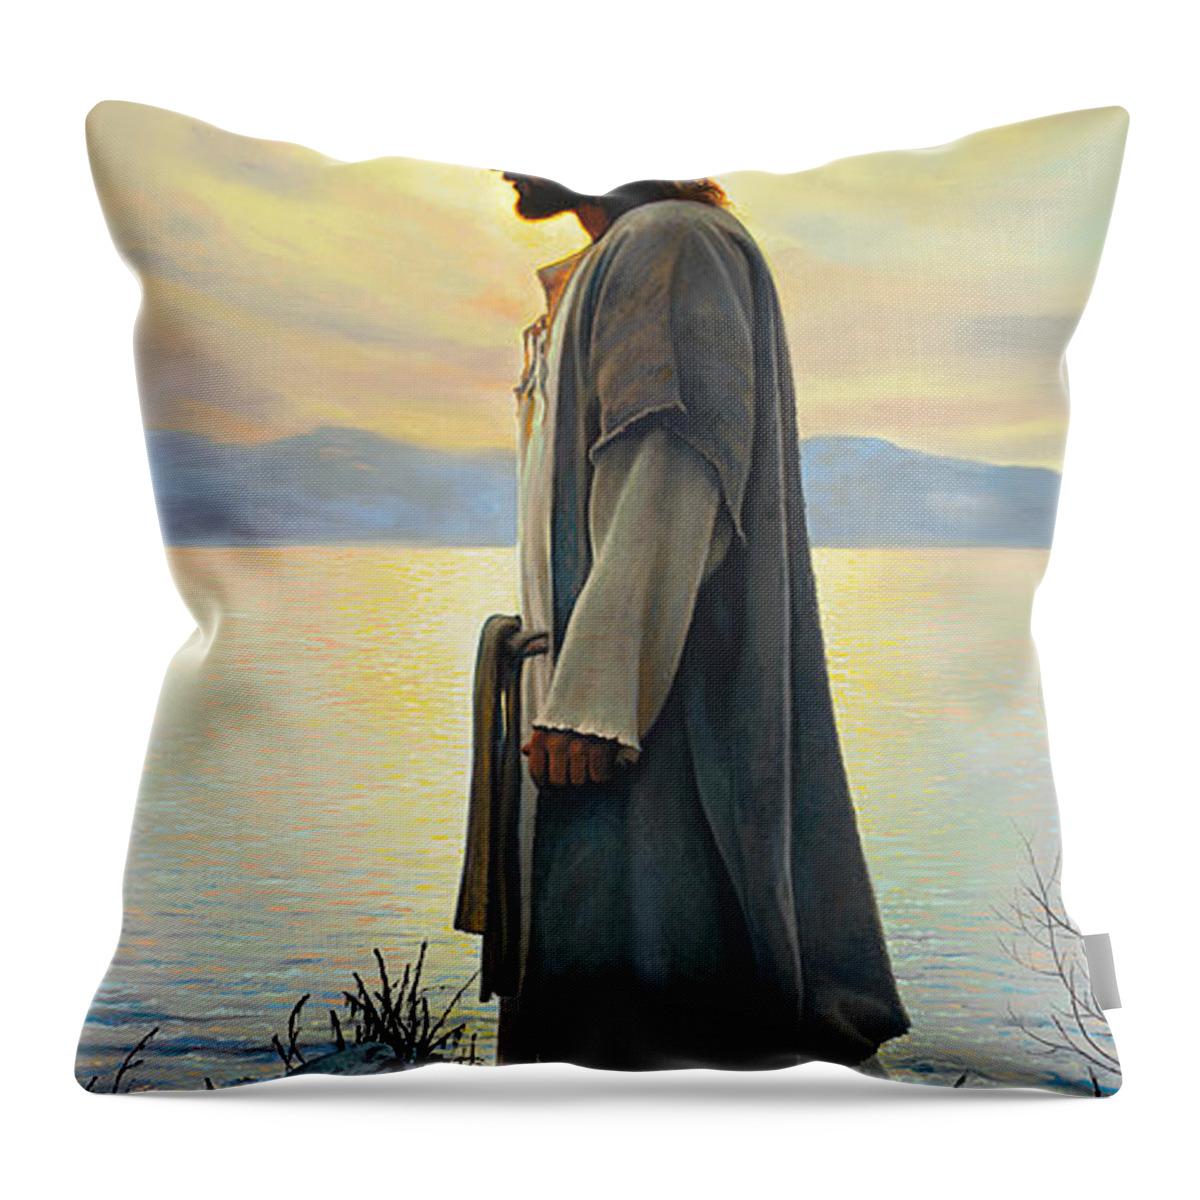 Jesus Throw Pillow featuring the painting Walk with Me by Greg Olsen